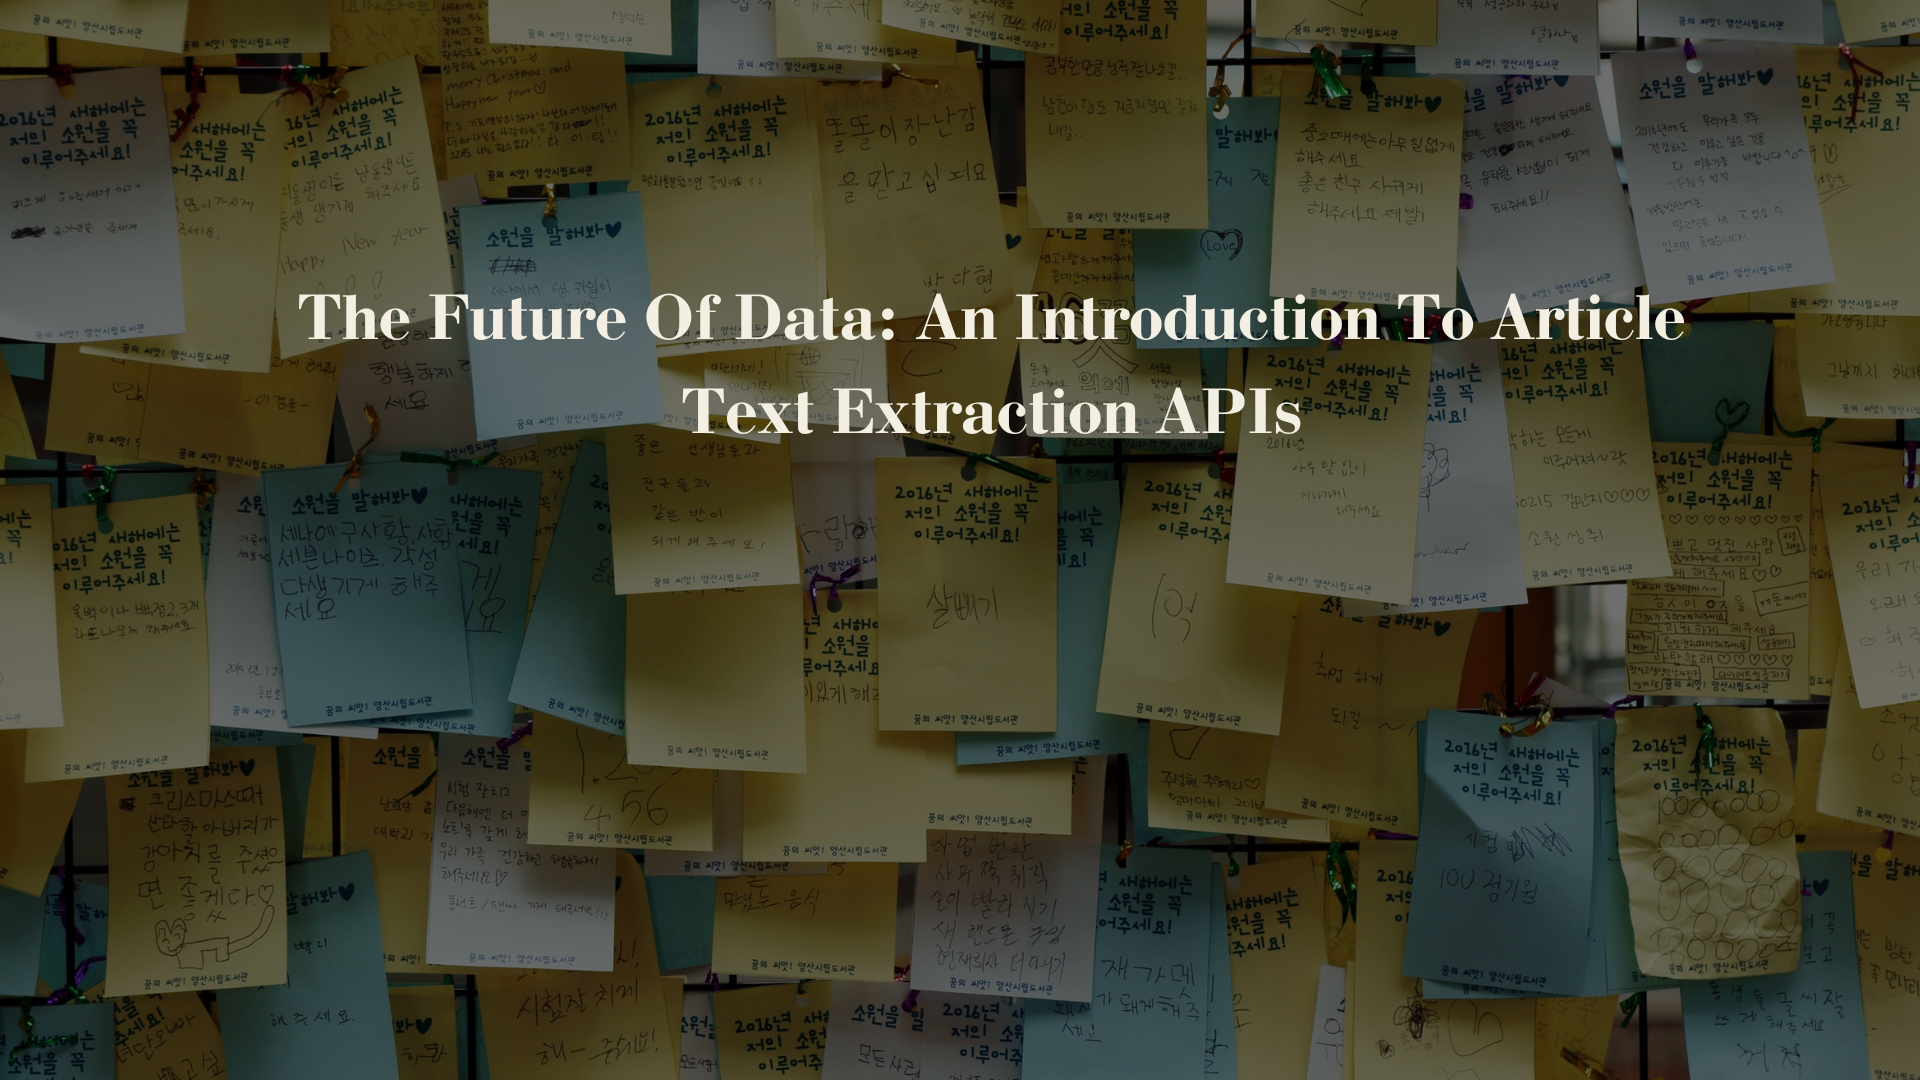 The Future Of Data: An Introduction To Article Text Extraction APIs